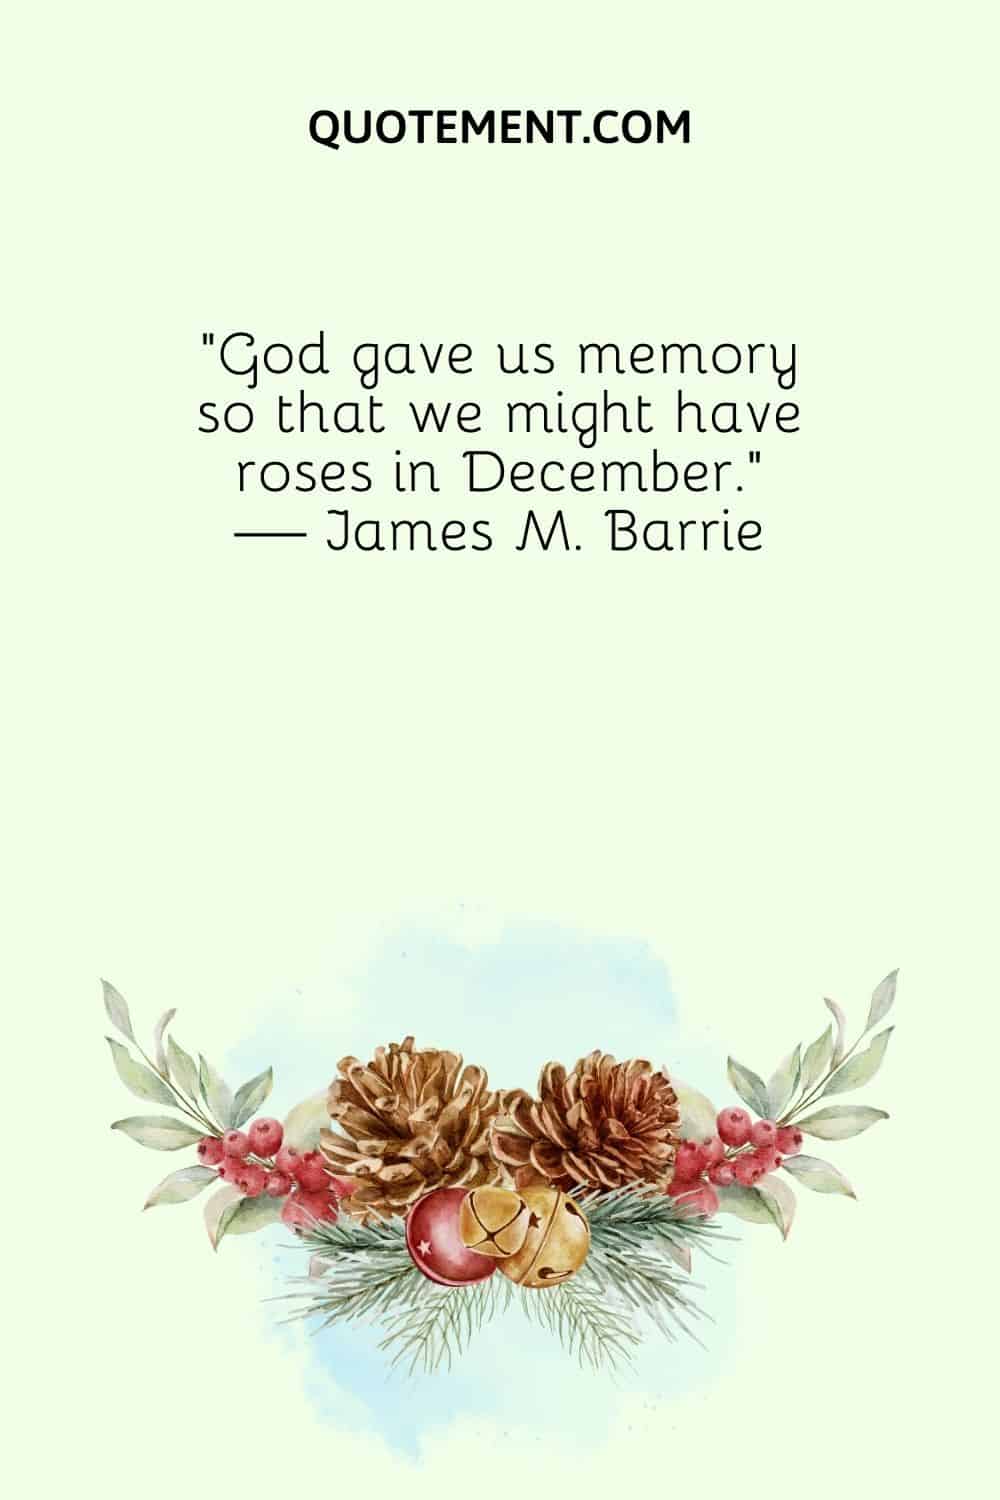 “God gave us memory so that we might have roses in December.” — James M. Barrie